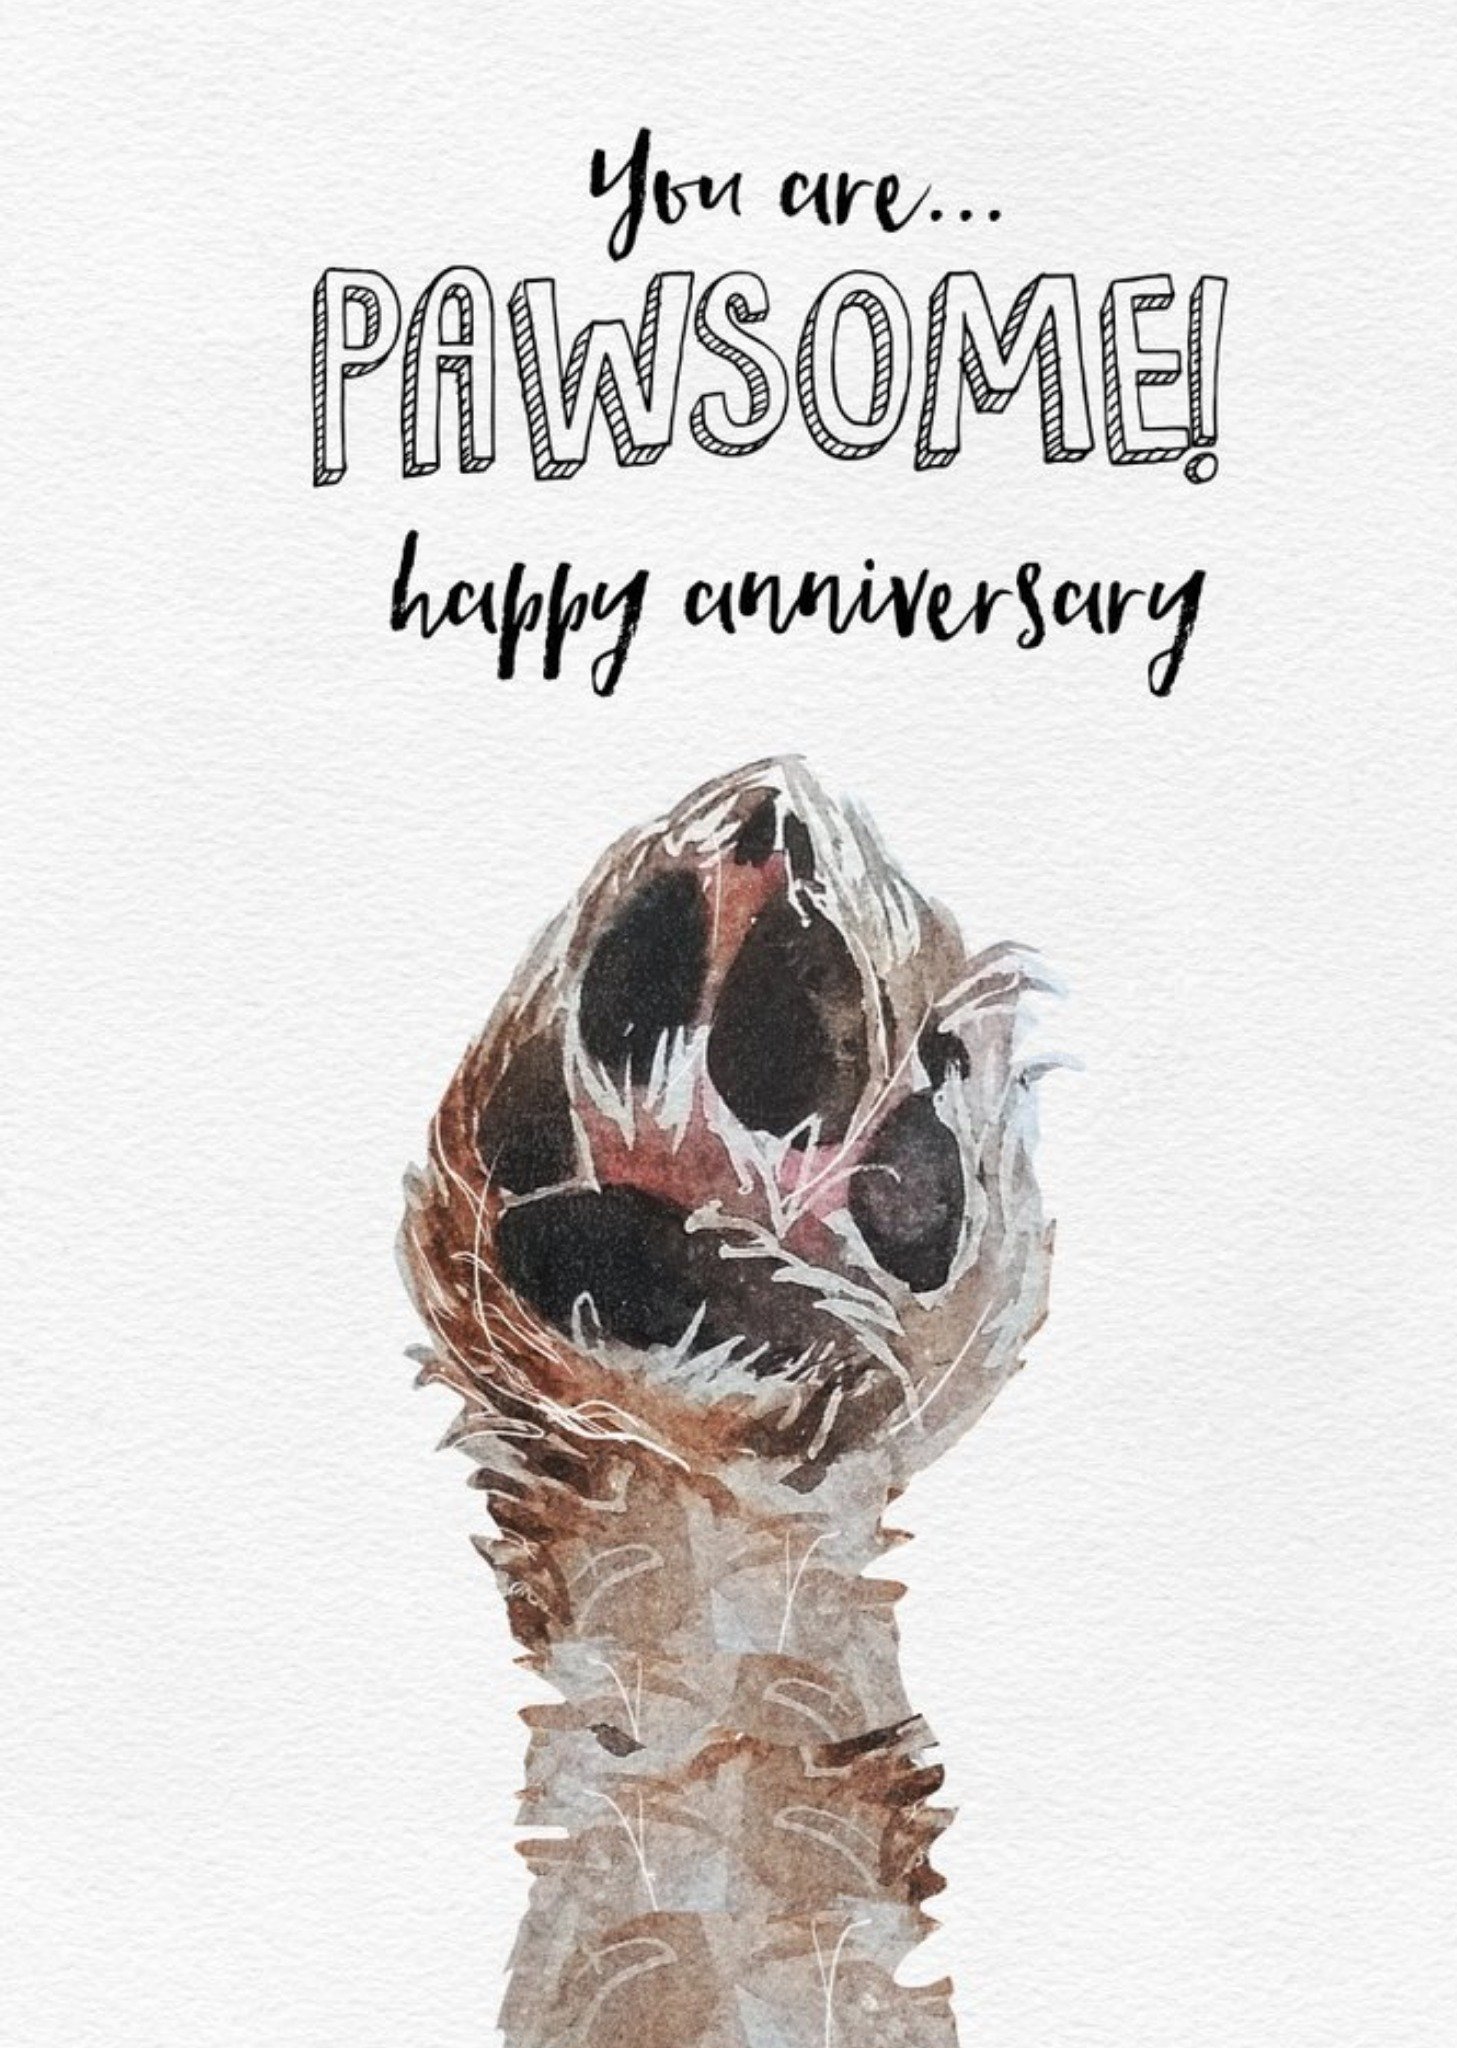 Moonpig Cute Paw Watercolour Illustration You Are Pawsome Anniversary Card, Large